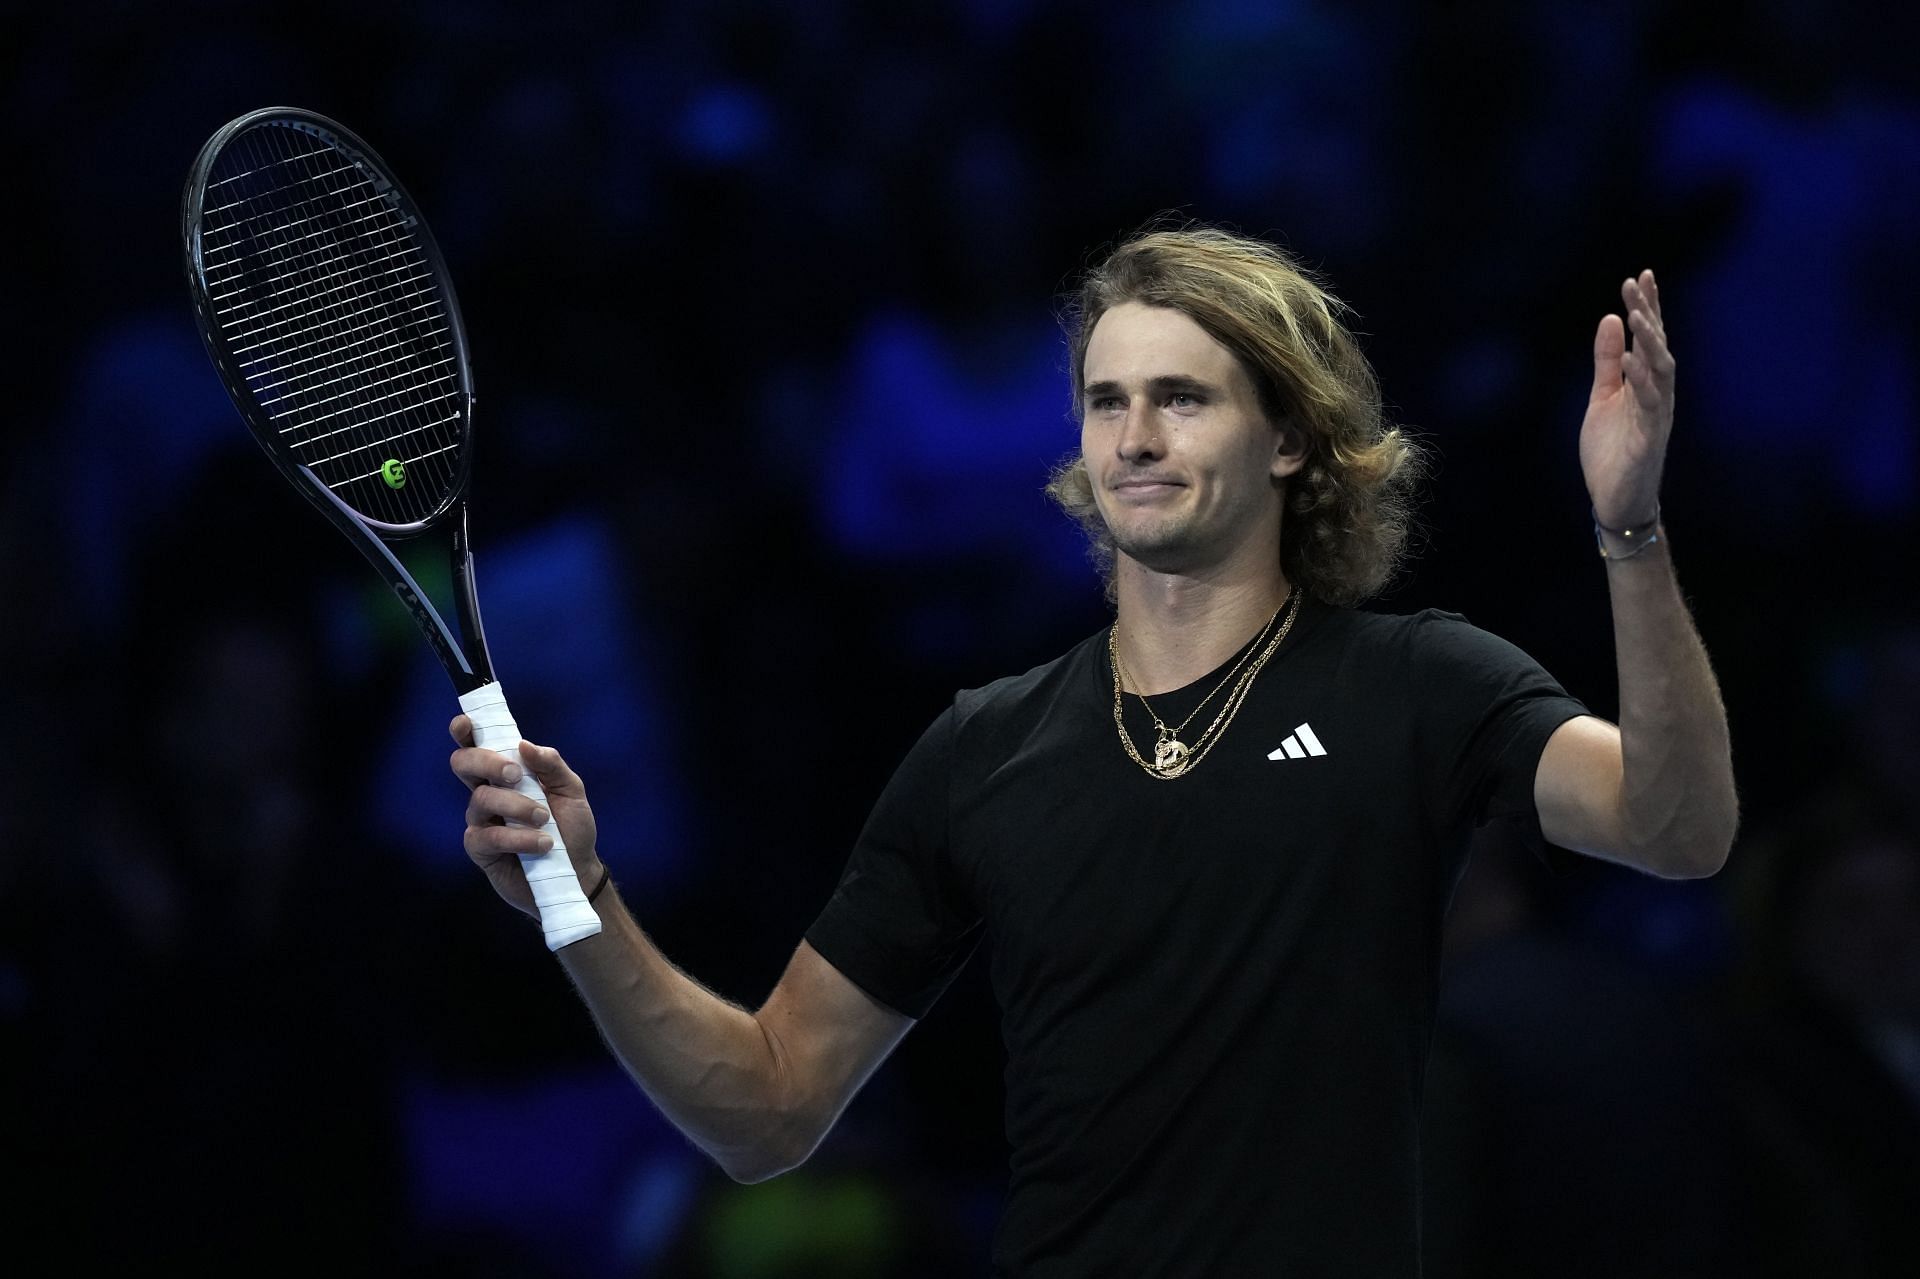 Alexander Zverev will also be in action on Day 4 of the ATP Finals.